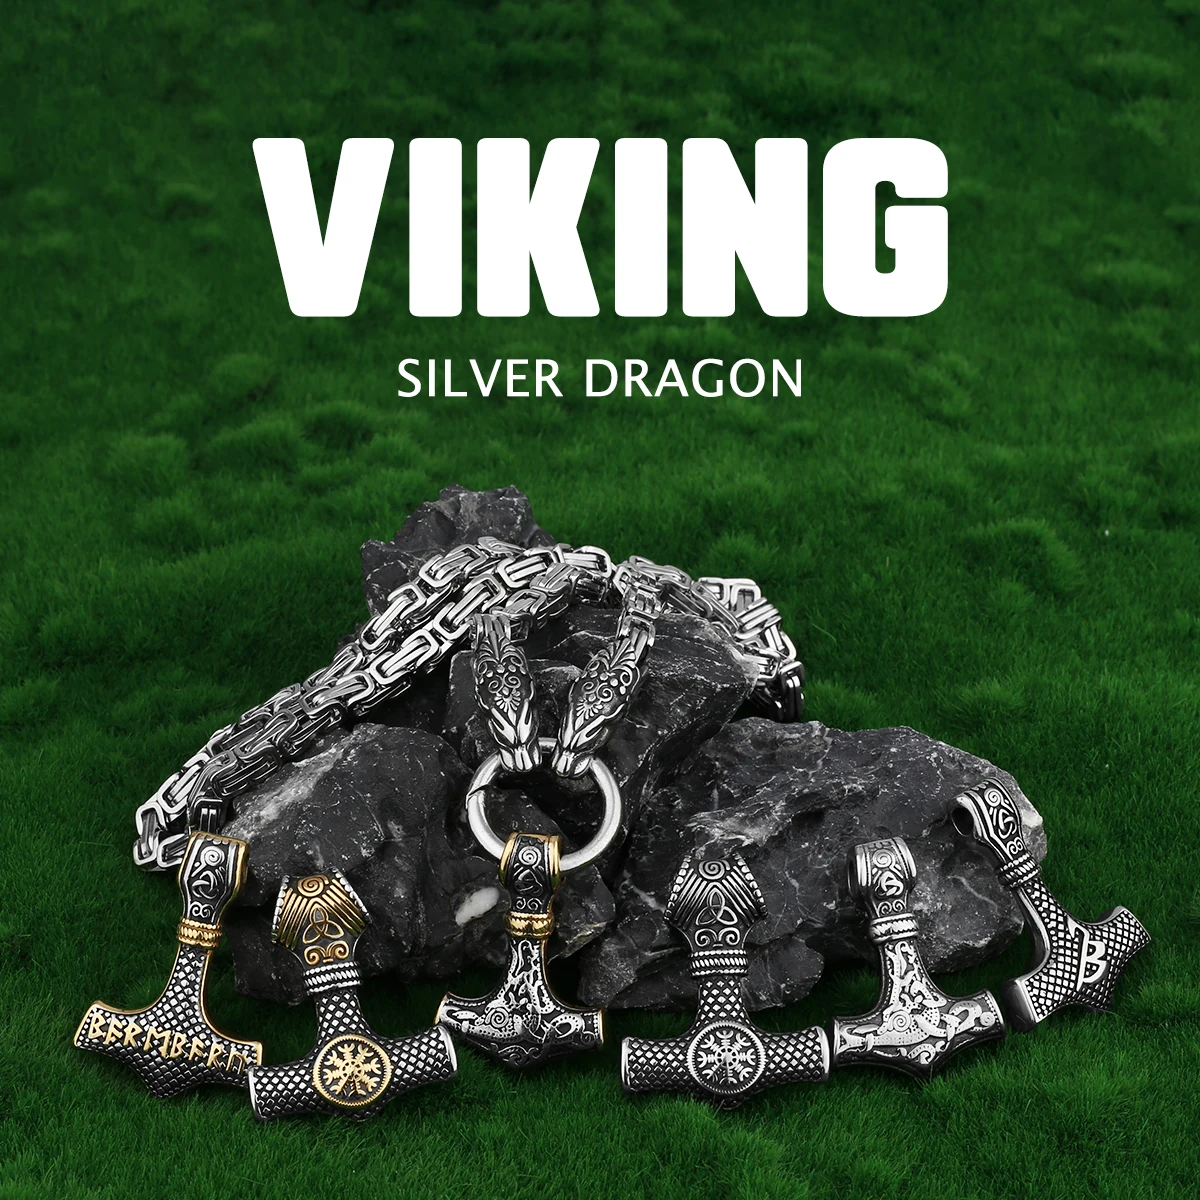 

2021 New Fashion [316L Stainless Steel] Nordic Domineering Viking Dragon Thor's Hammer Men's Pendant Necklace Jewelry Gift